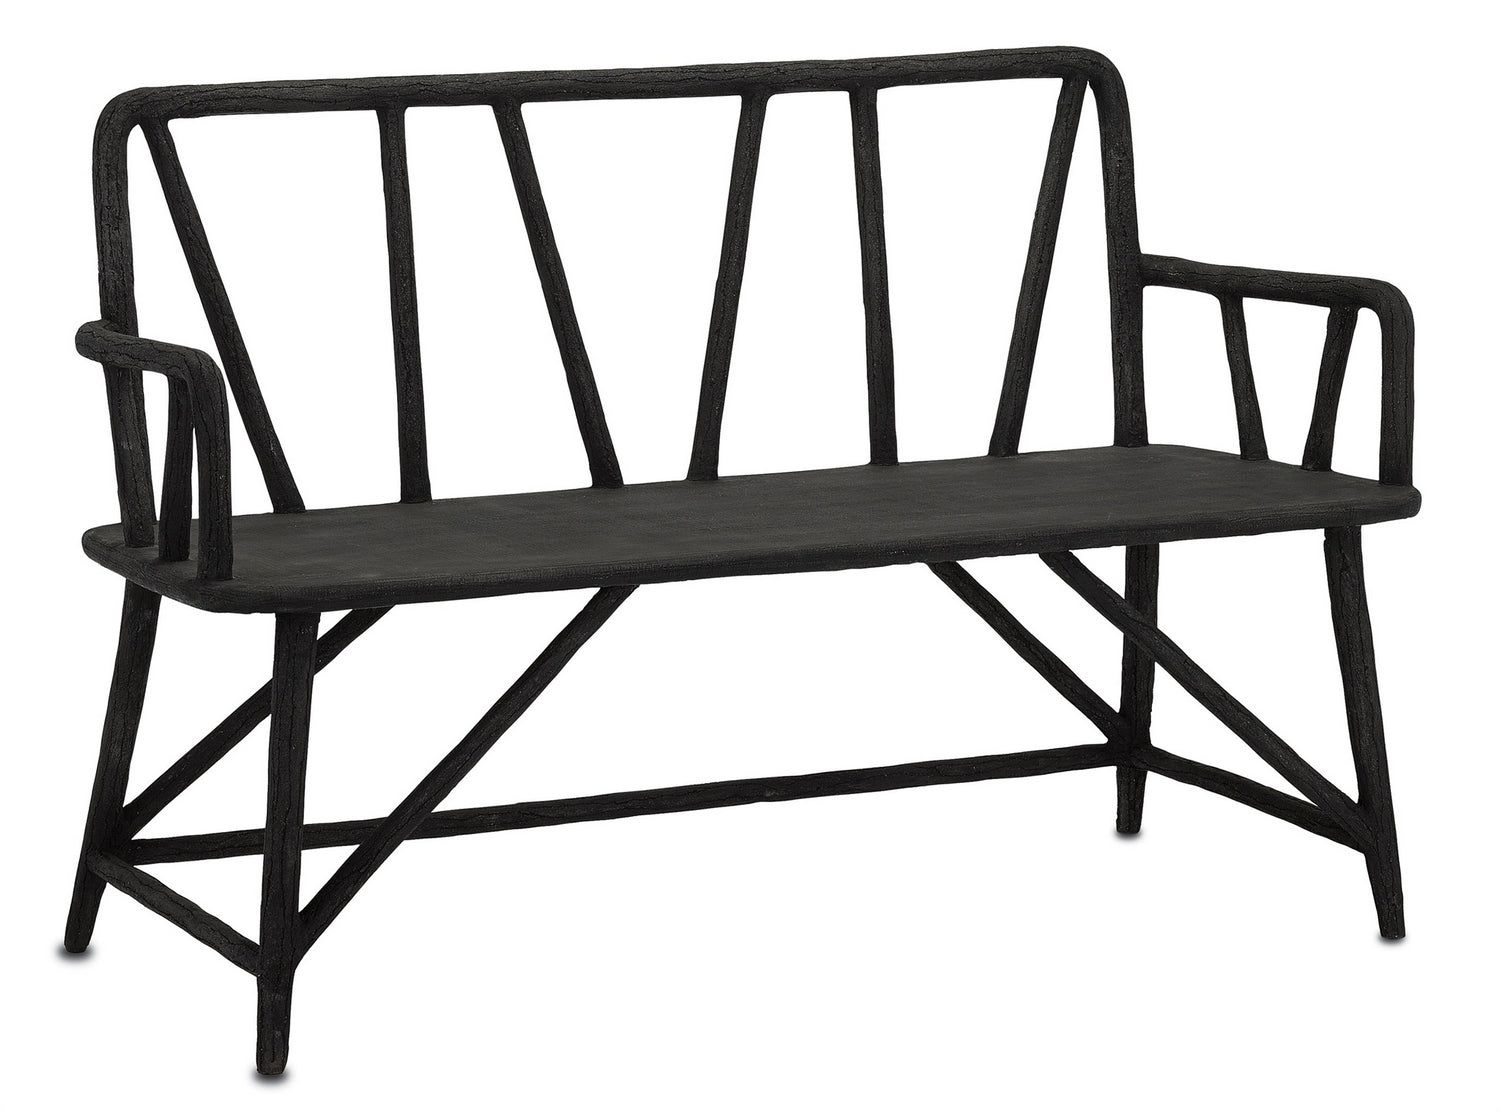 Bench from the Arboria collection in Distressed Black/Faux Bois finish